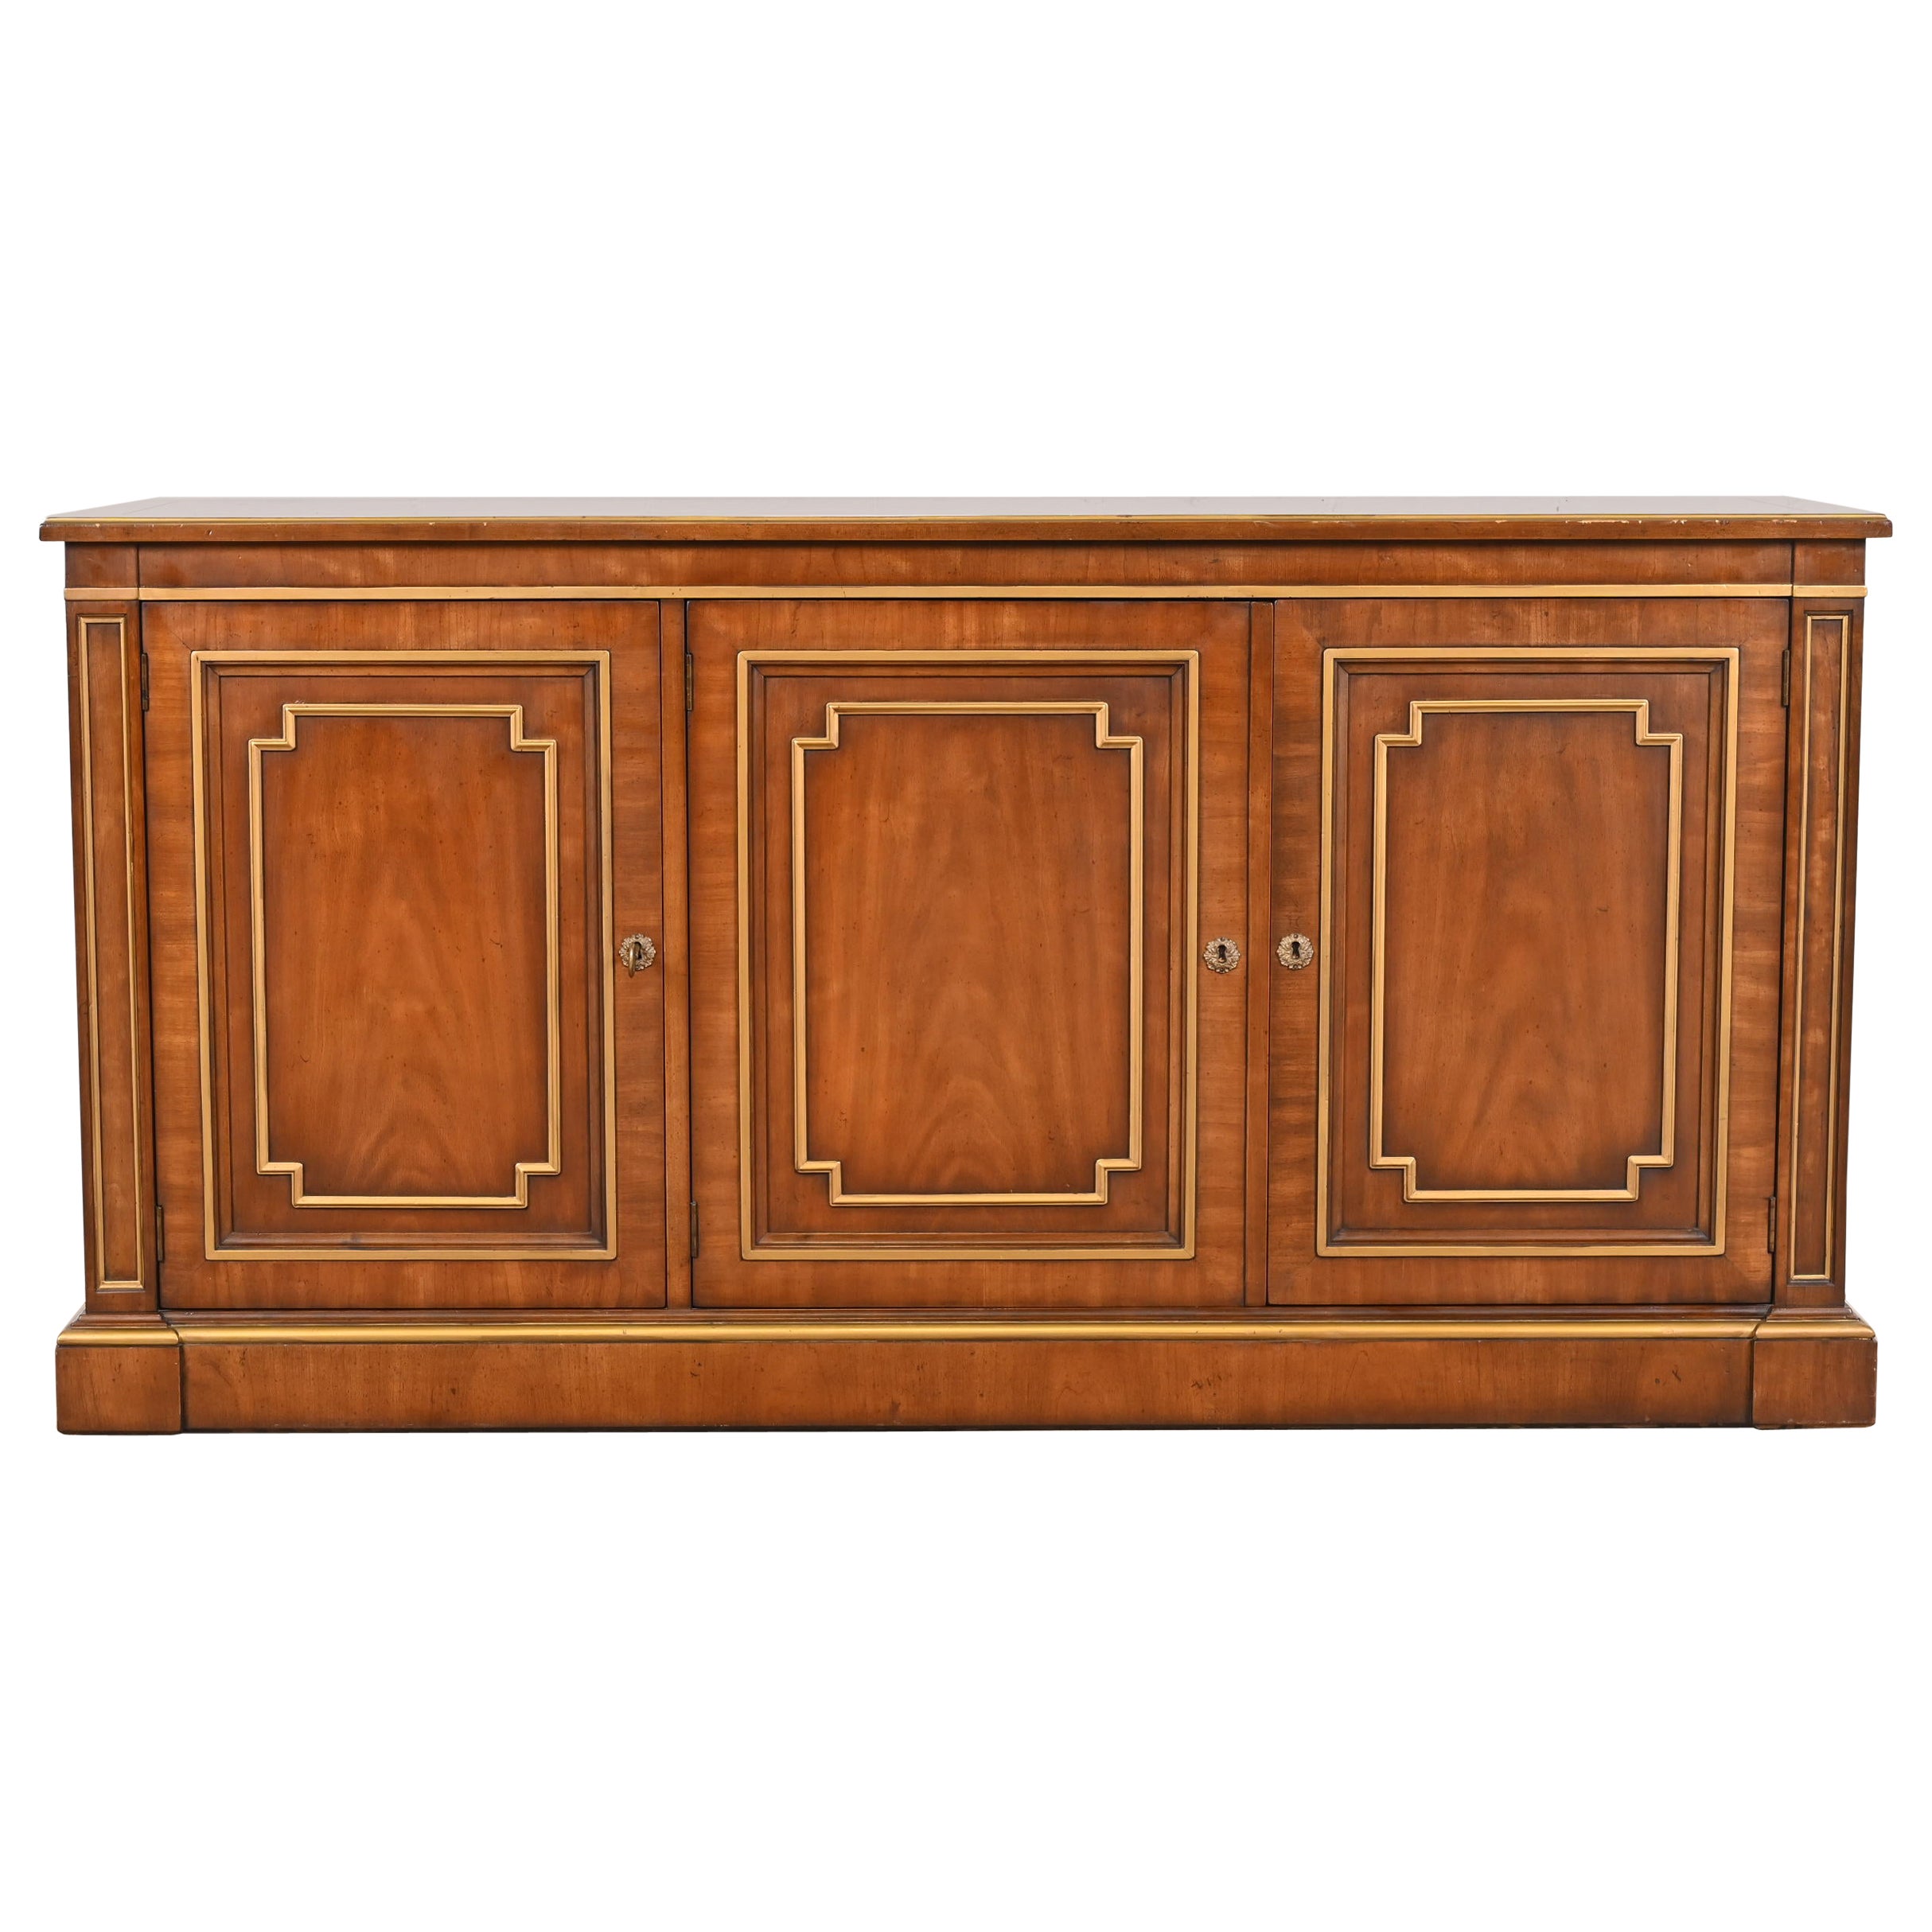 Kindel Furniture Neoclassical Cherry and Gold Gilt Sideboard Credenza